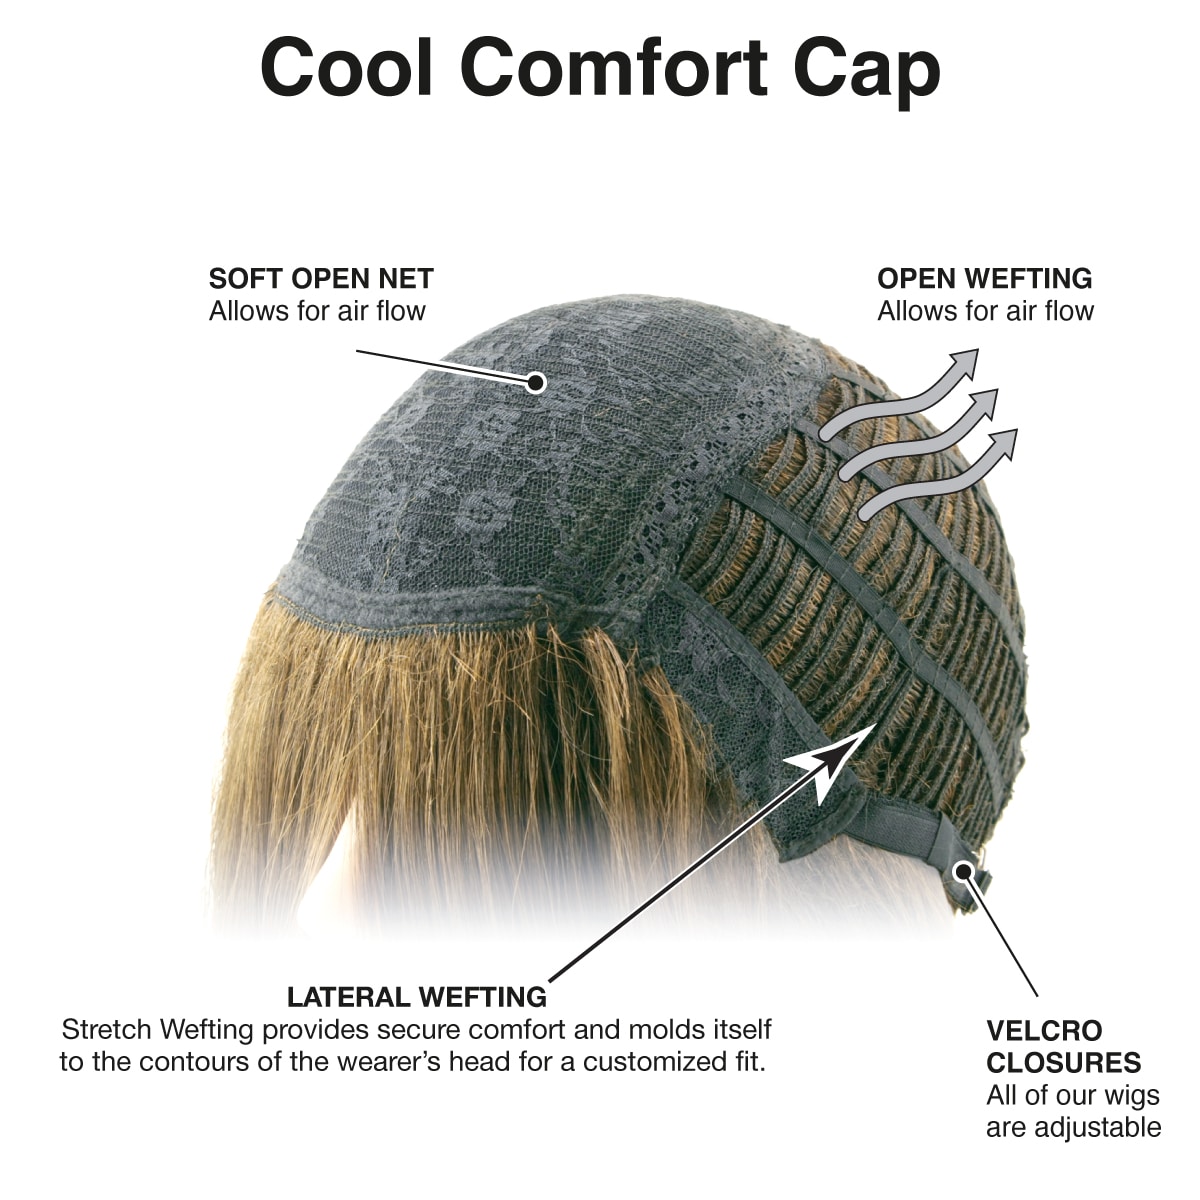 Cool comfort cap by TressAllure for Look Fabulous